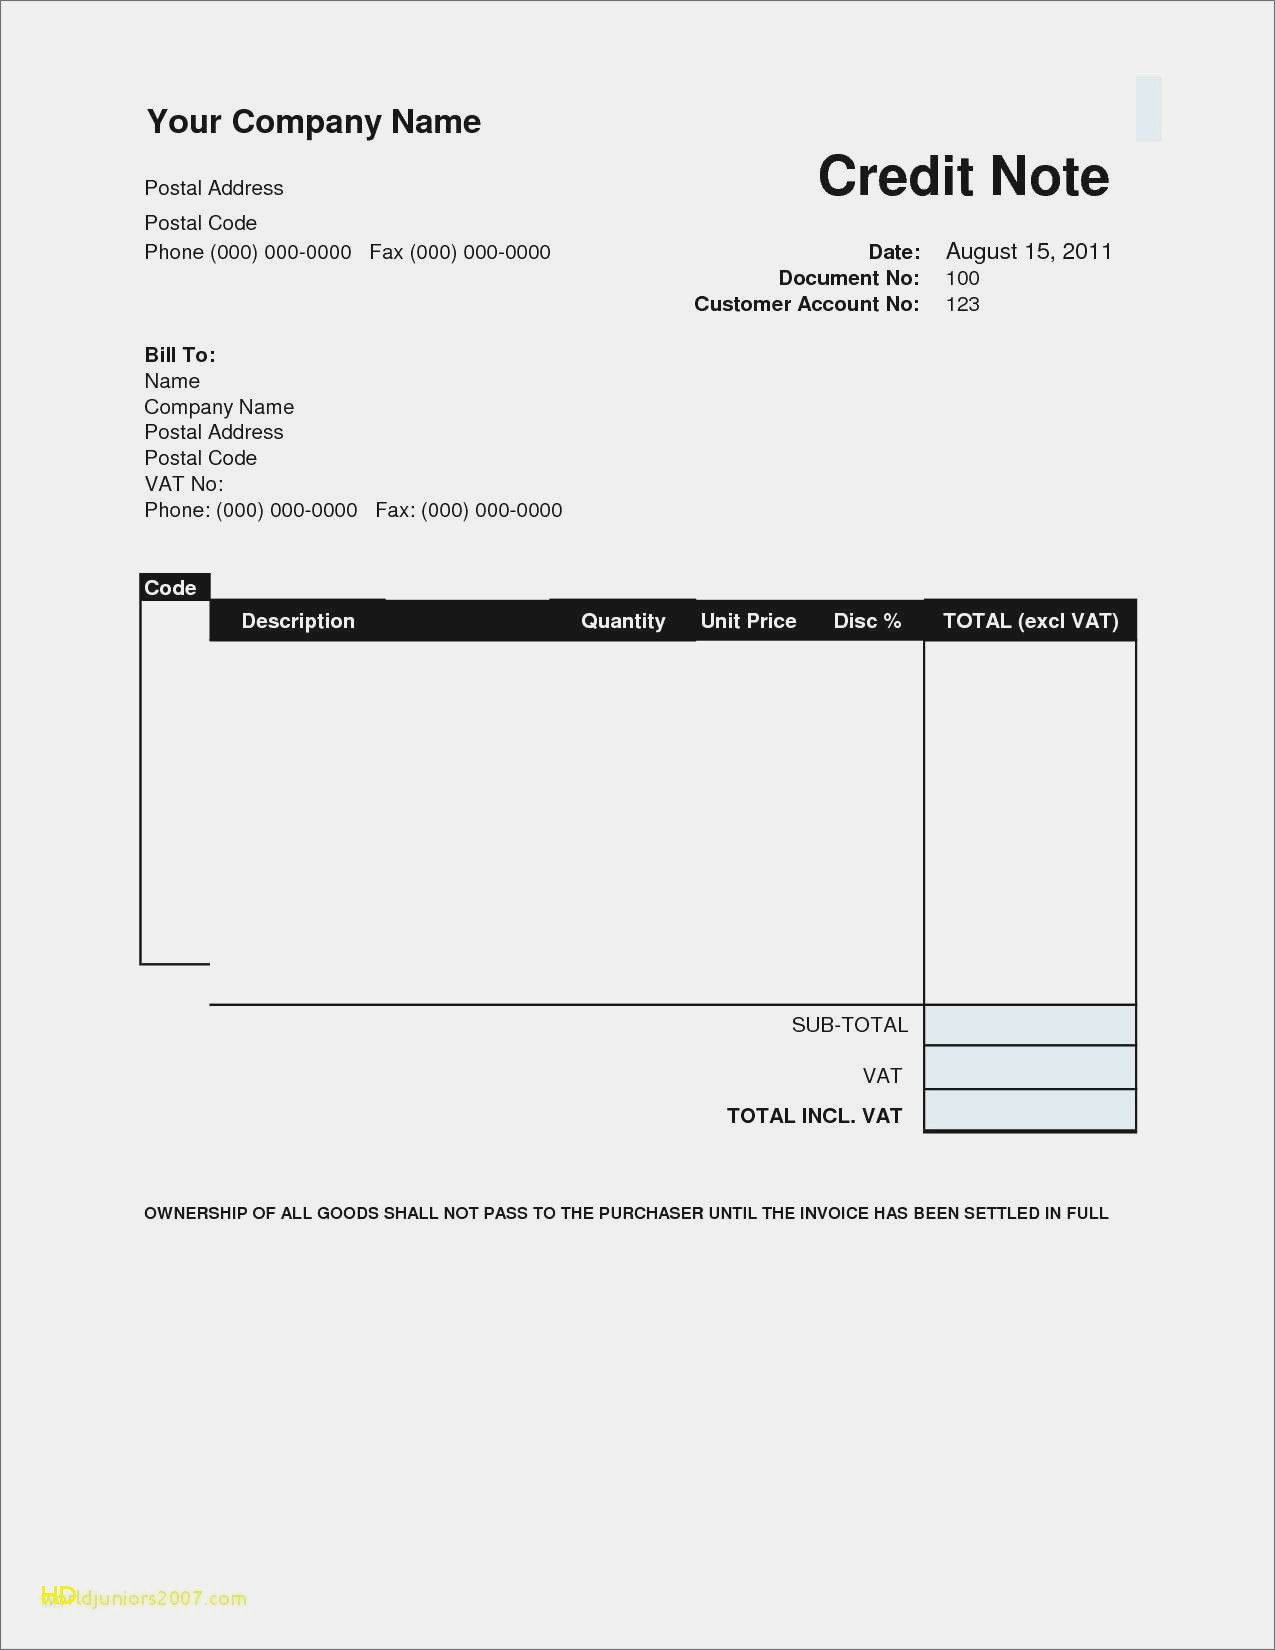 Invoice Policy Template With 17 Unique Free Printable Catering - Free Printable Catering Invoice Template